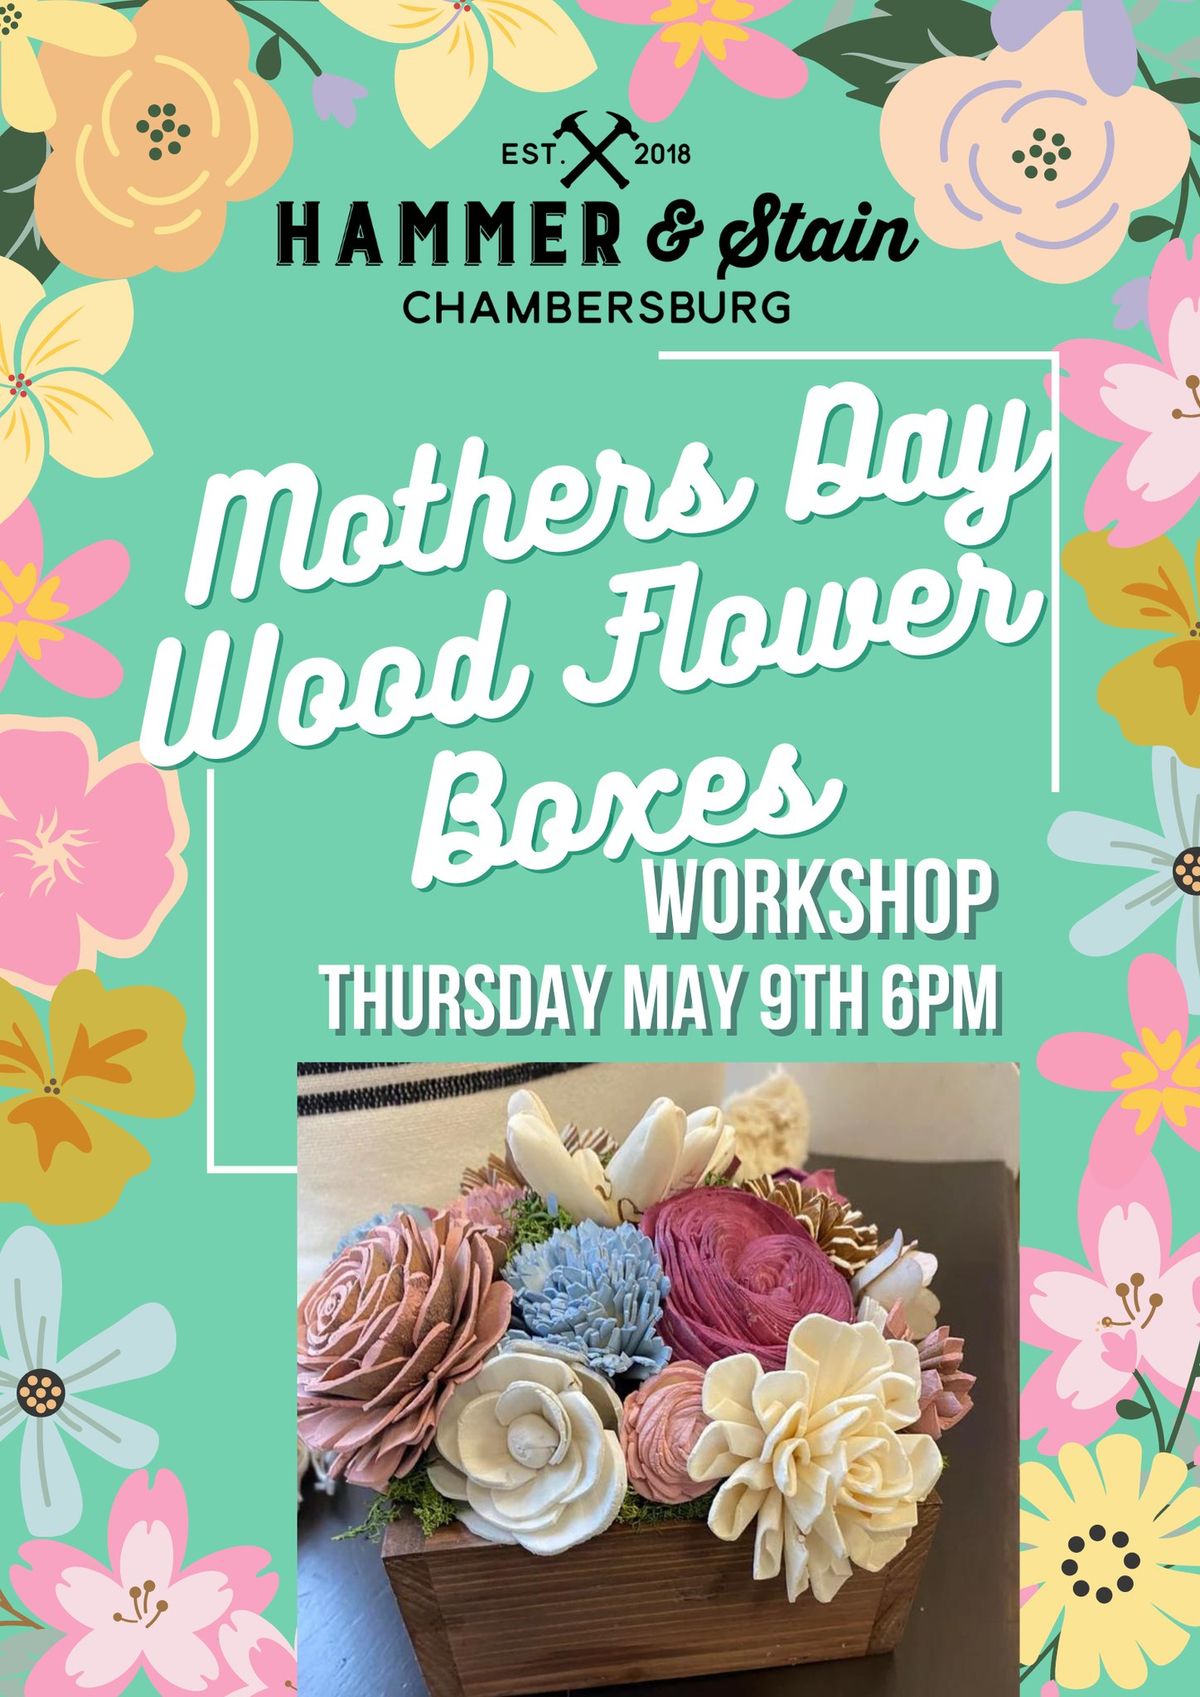 Thursday May 9th- Mother's Day Wood Flower Boxes Workshop 6pm